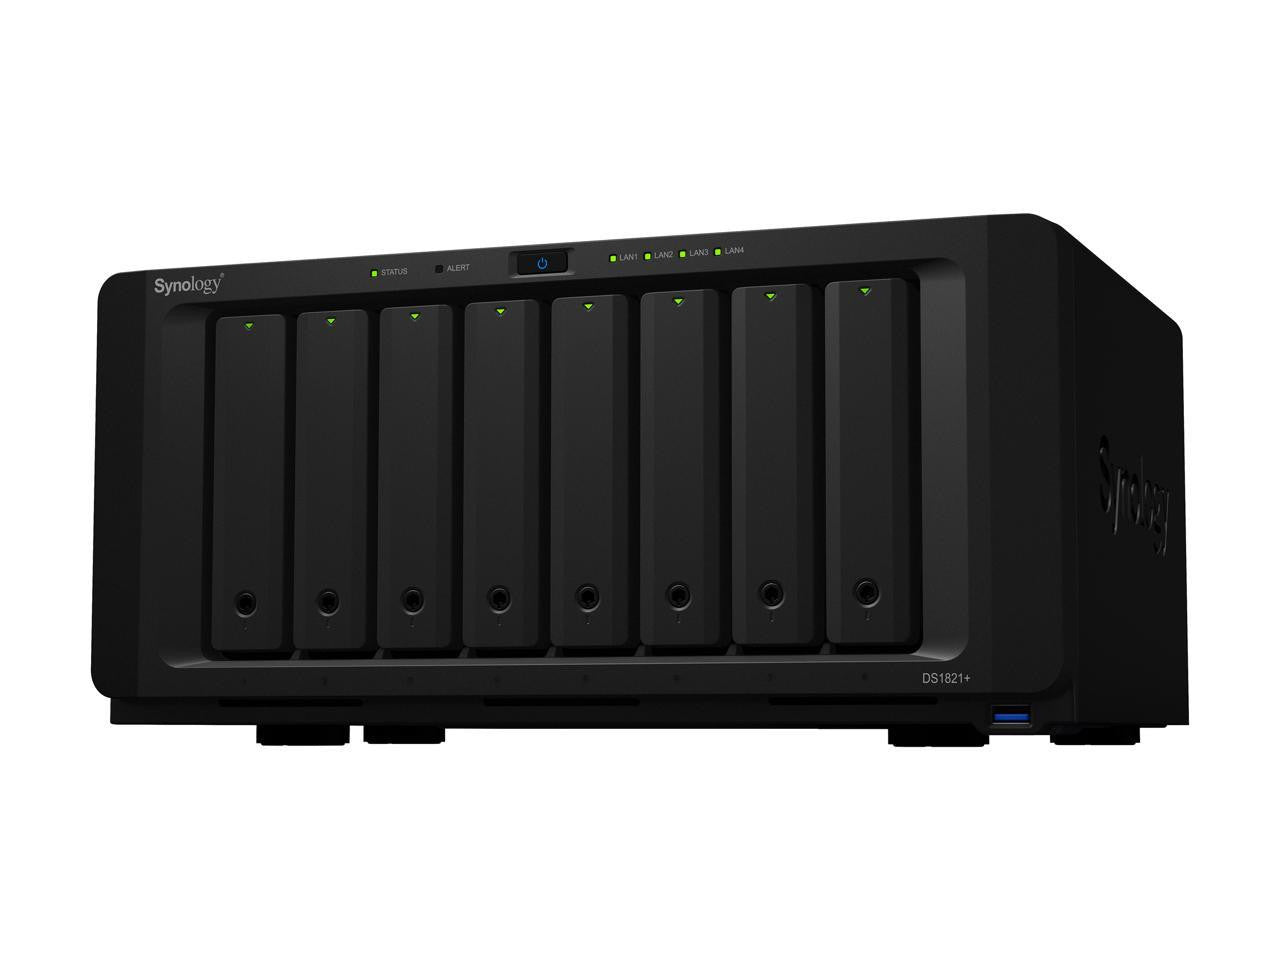 Synology DS1821+ 8-BAY DiskStation with 16GB Synology RAM and 64TB (8x8TB) Synology Enterprise HAT5300 Drives Fully Assembled and Tested